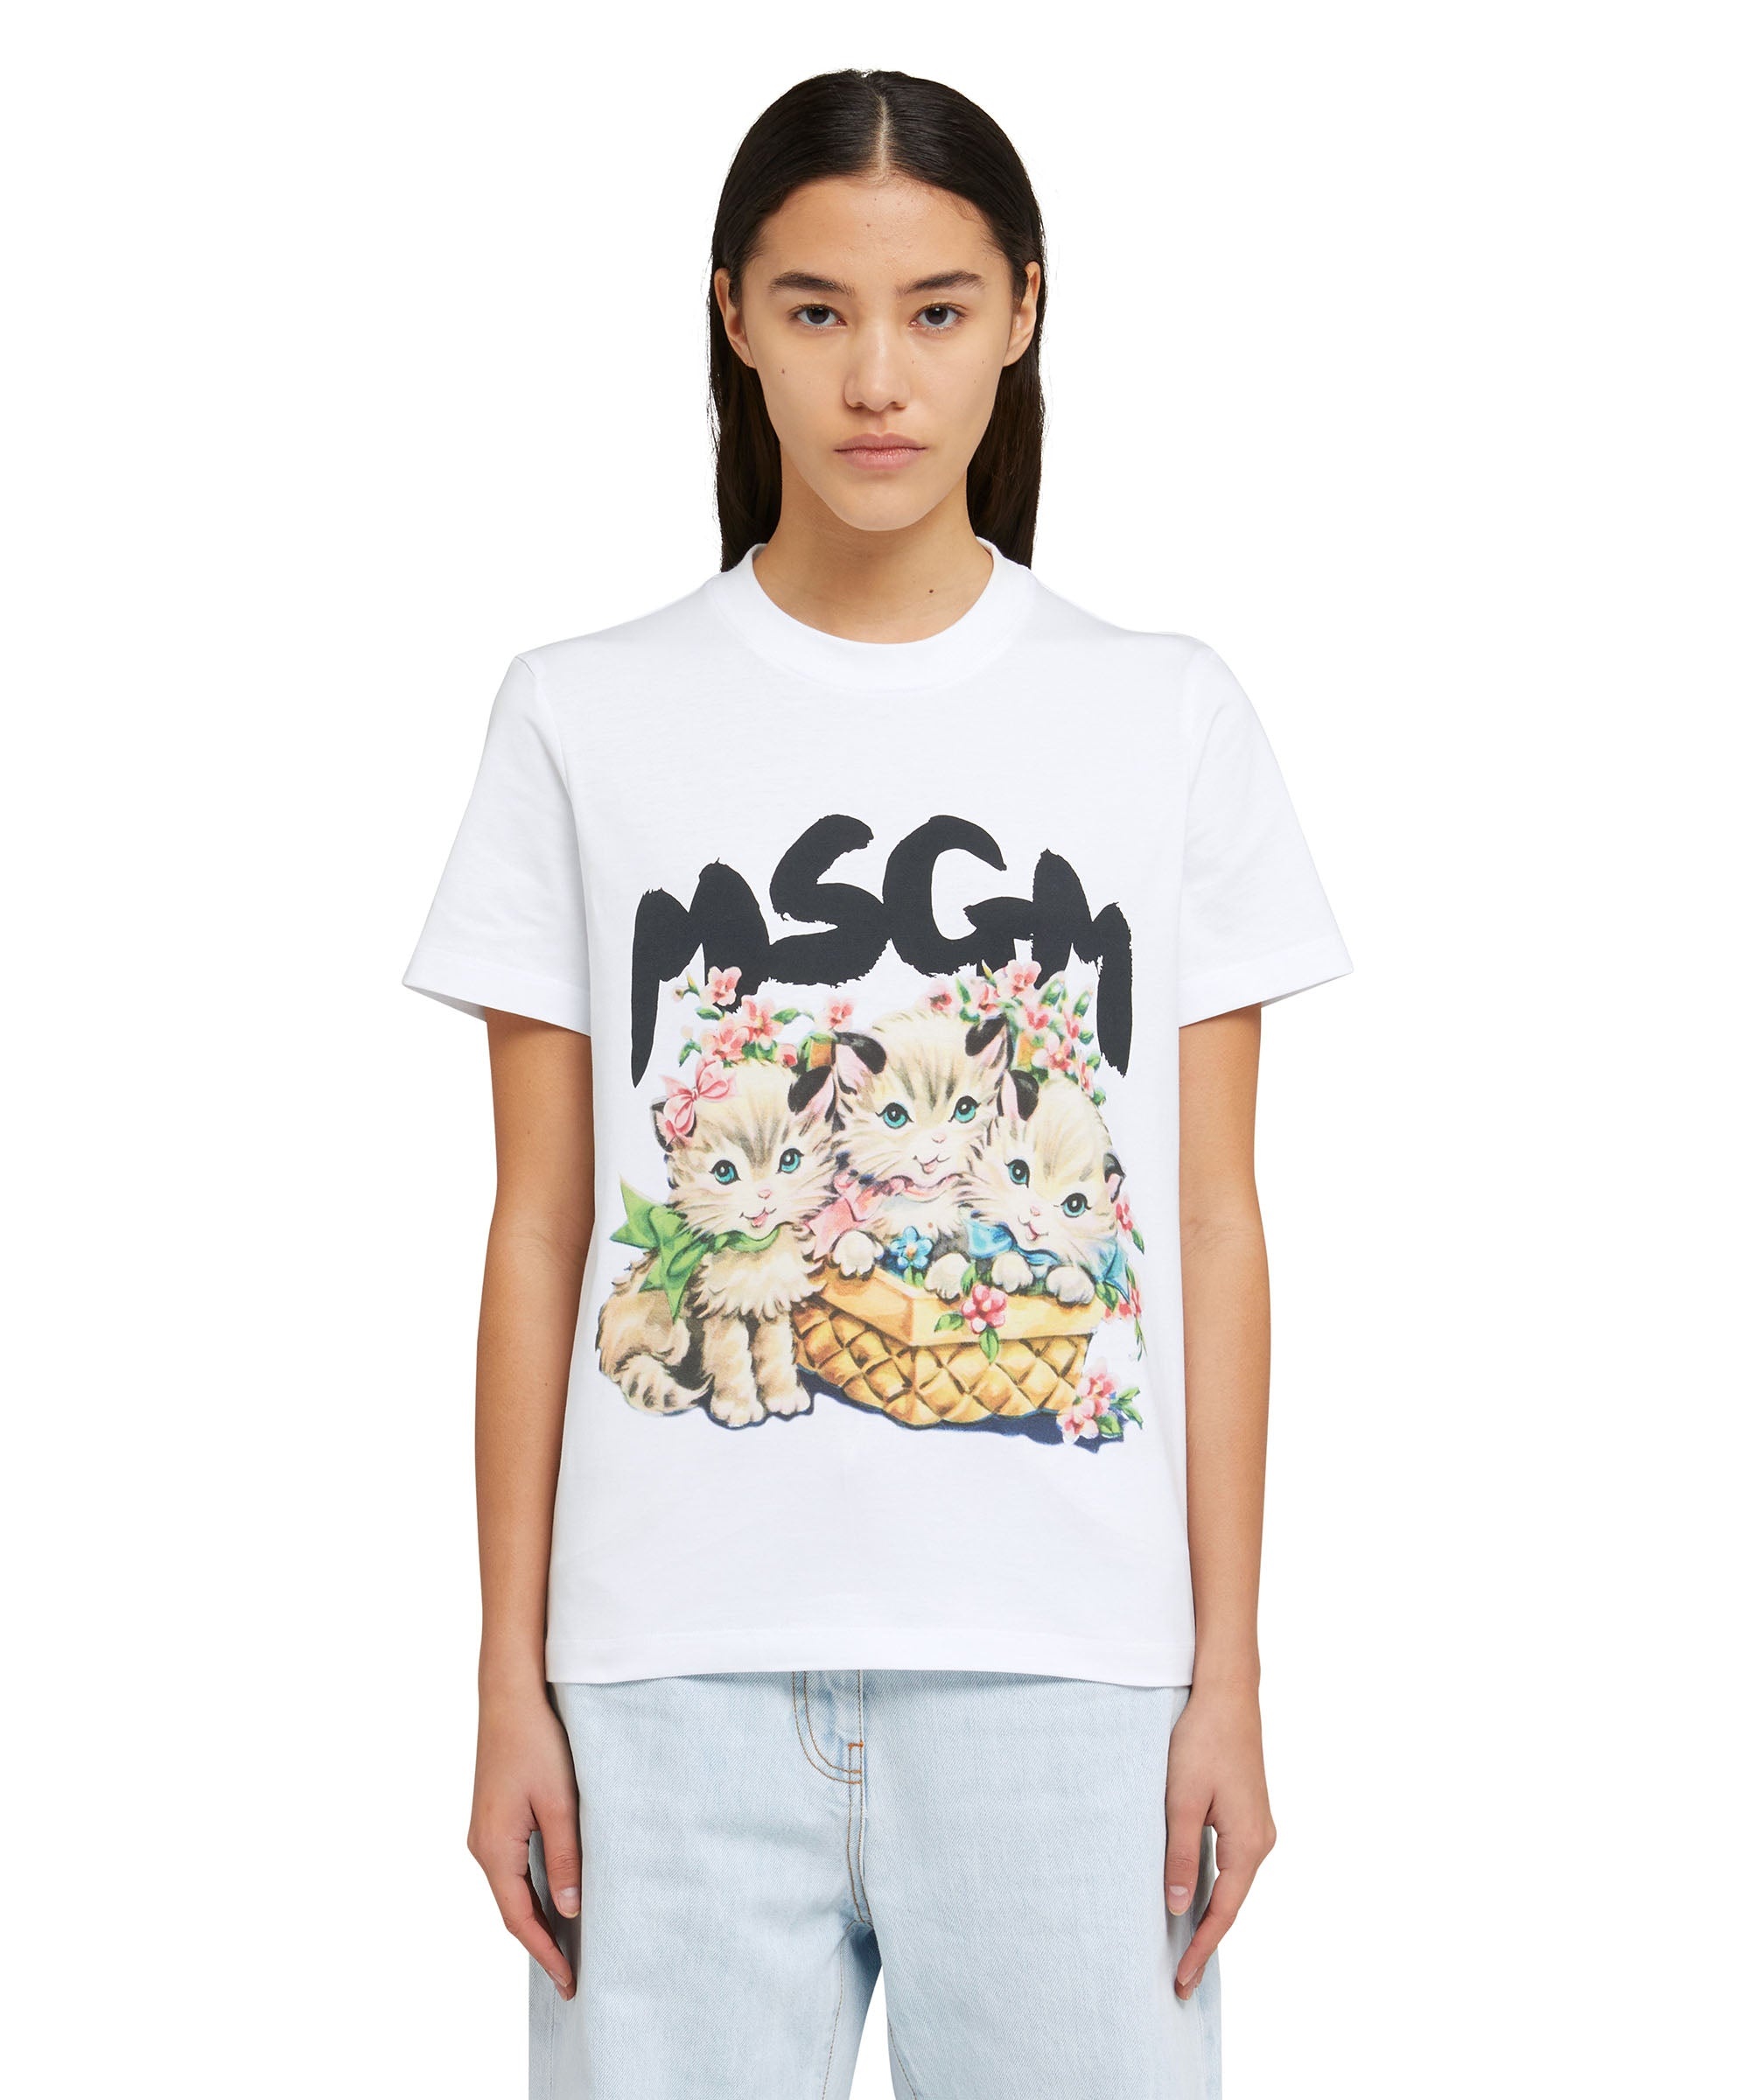 T-Shirt with "basket of cats" graphic - 2